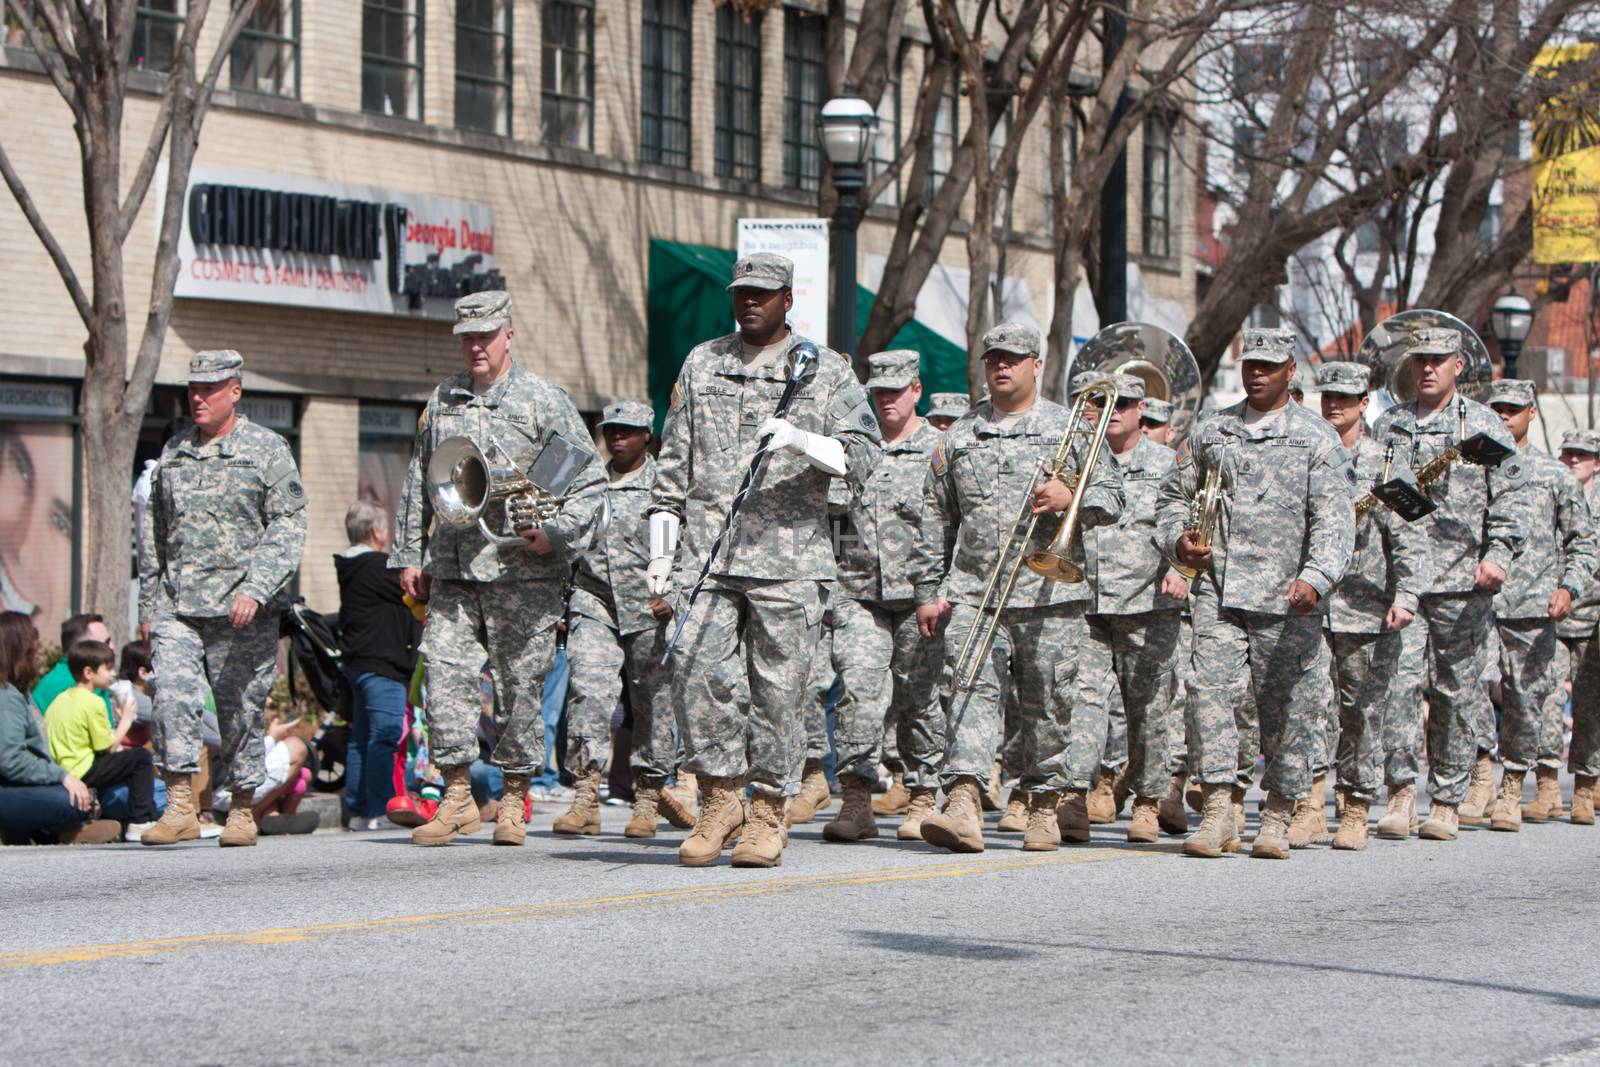 Atlanta, GA - March 15, 2014:  An Army band marches and performs in the annual St. Patrick's parade.